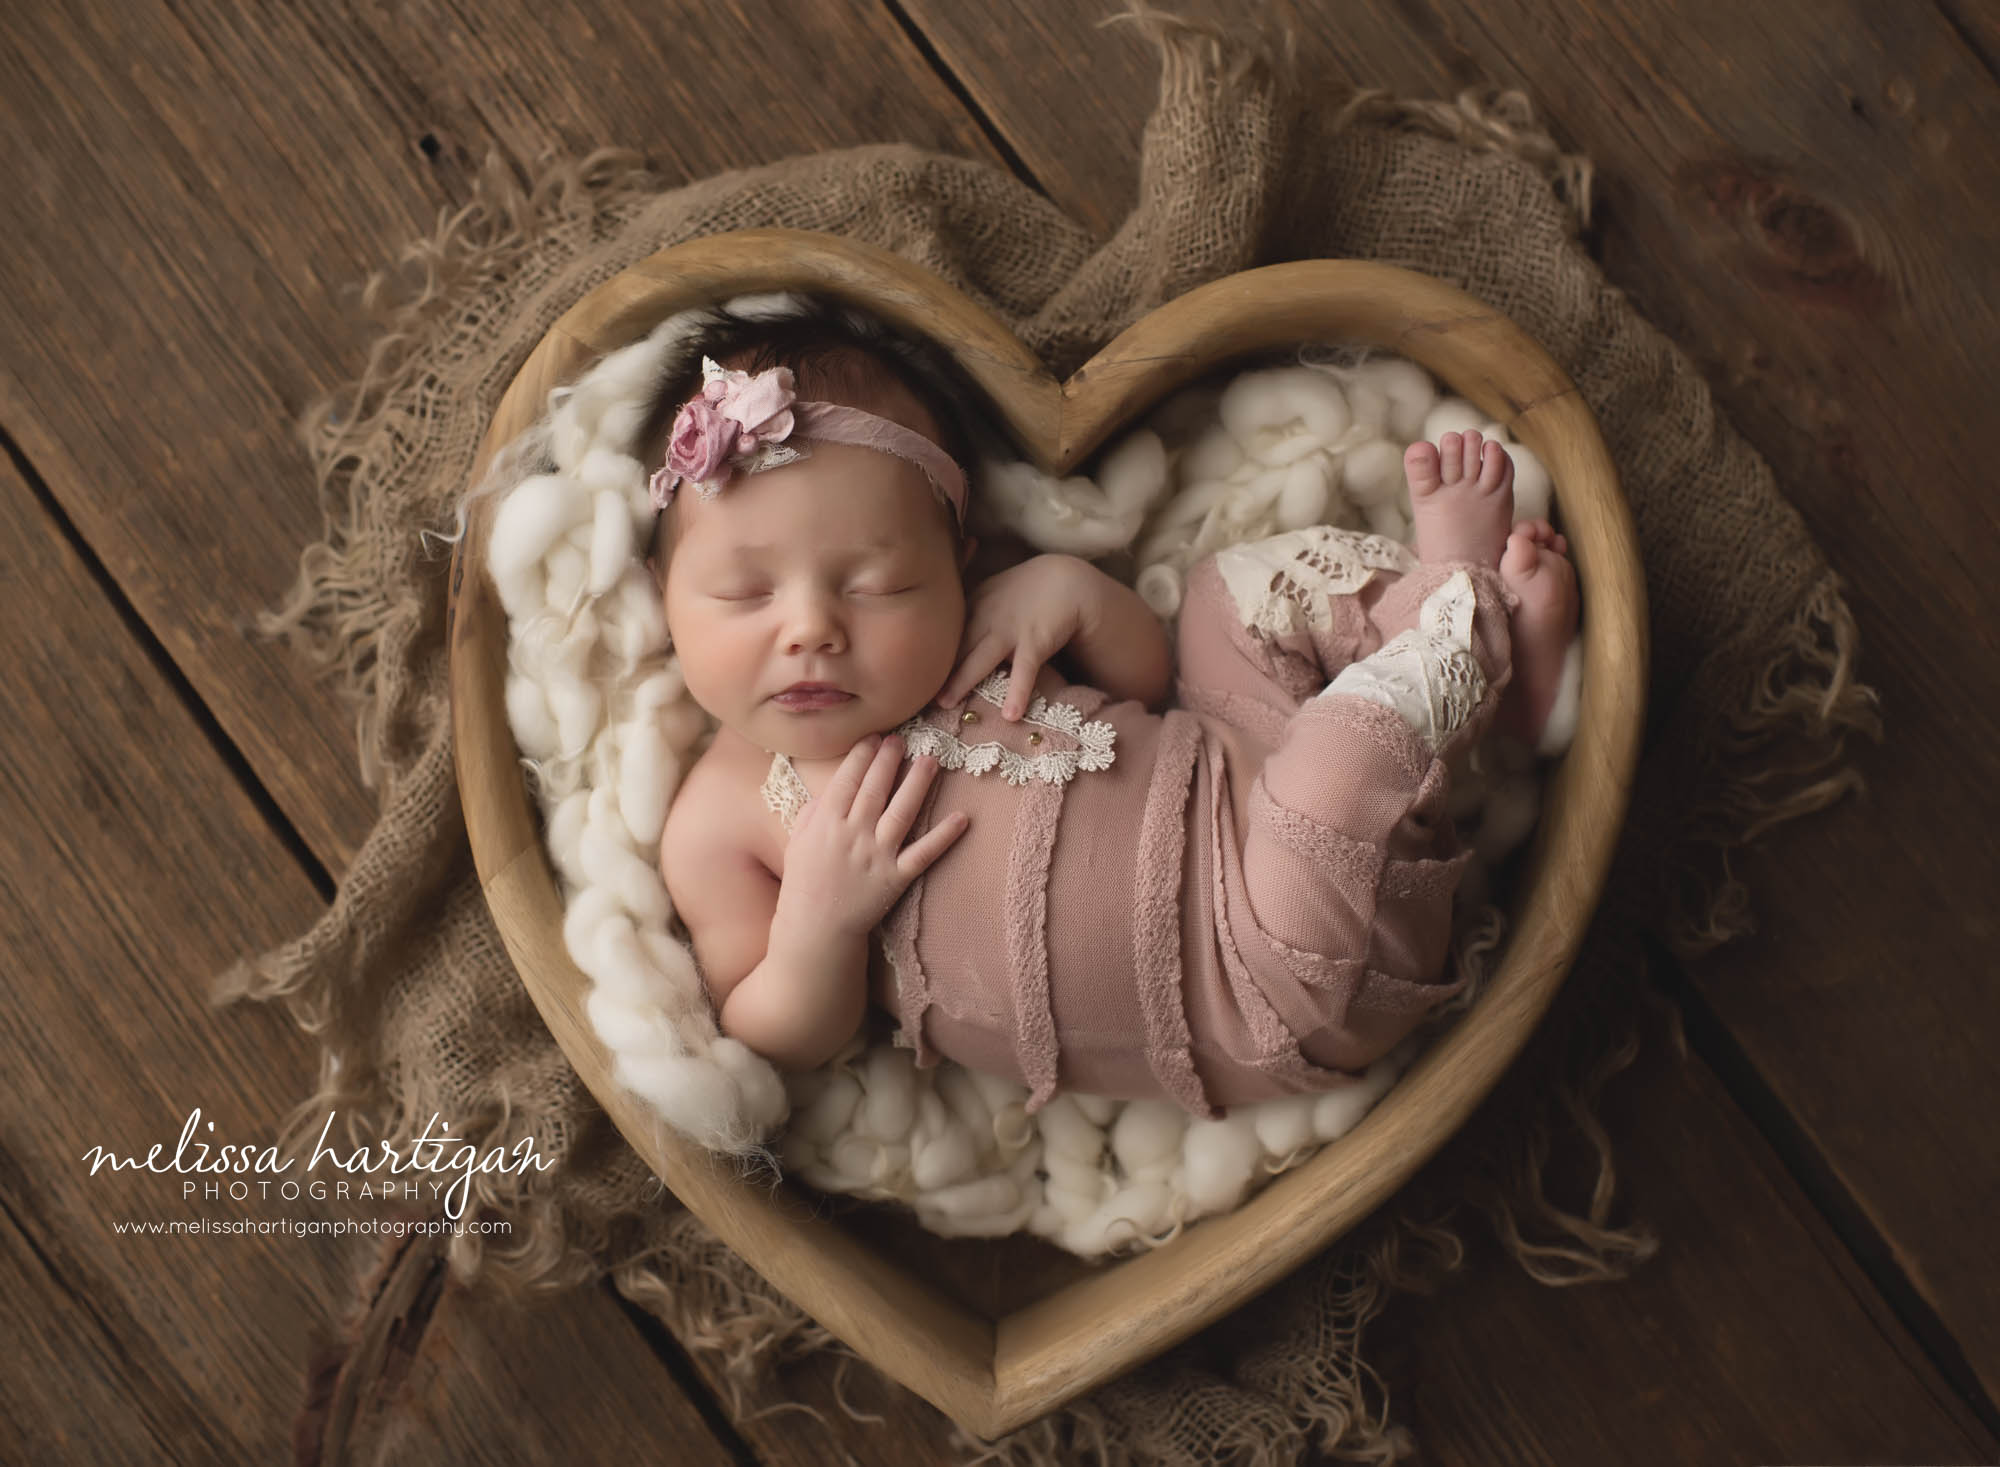 newborn baby girl posed in heart shaped wooden prop with pink outfit and flower headband